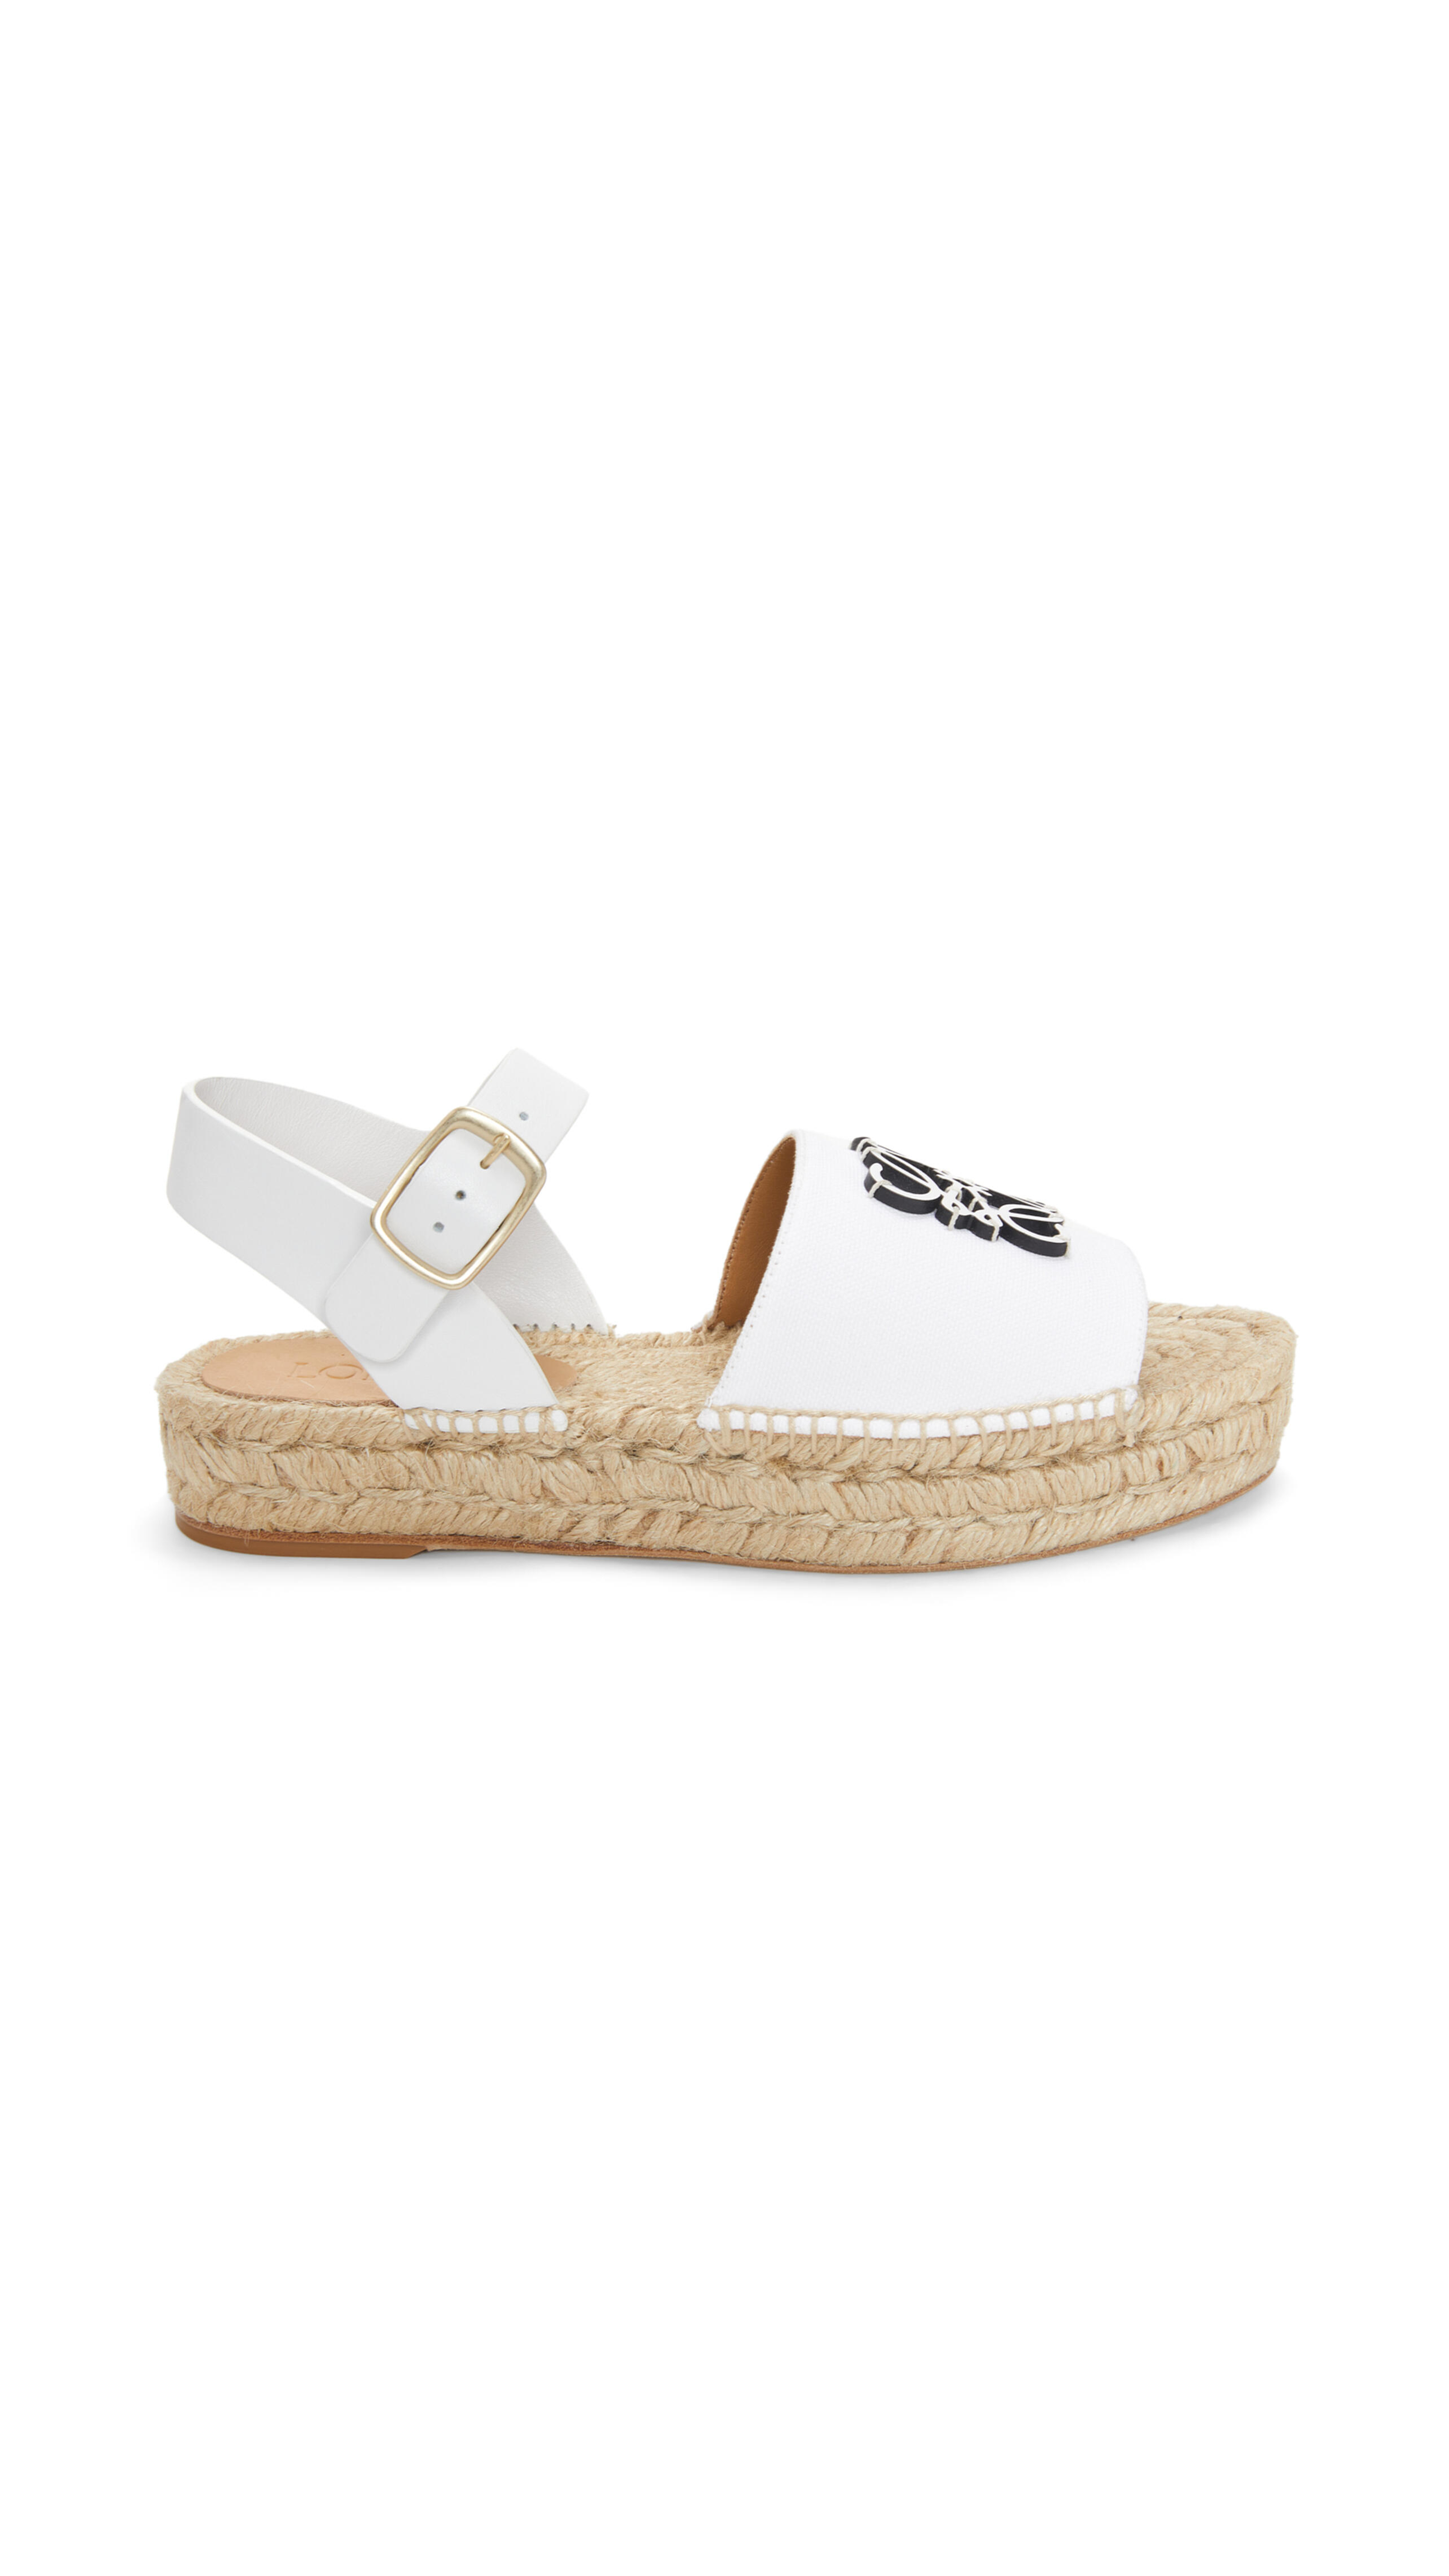 Anagram Espadrille in Canvas and Calfskin - White